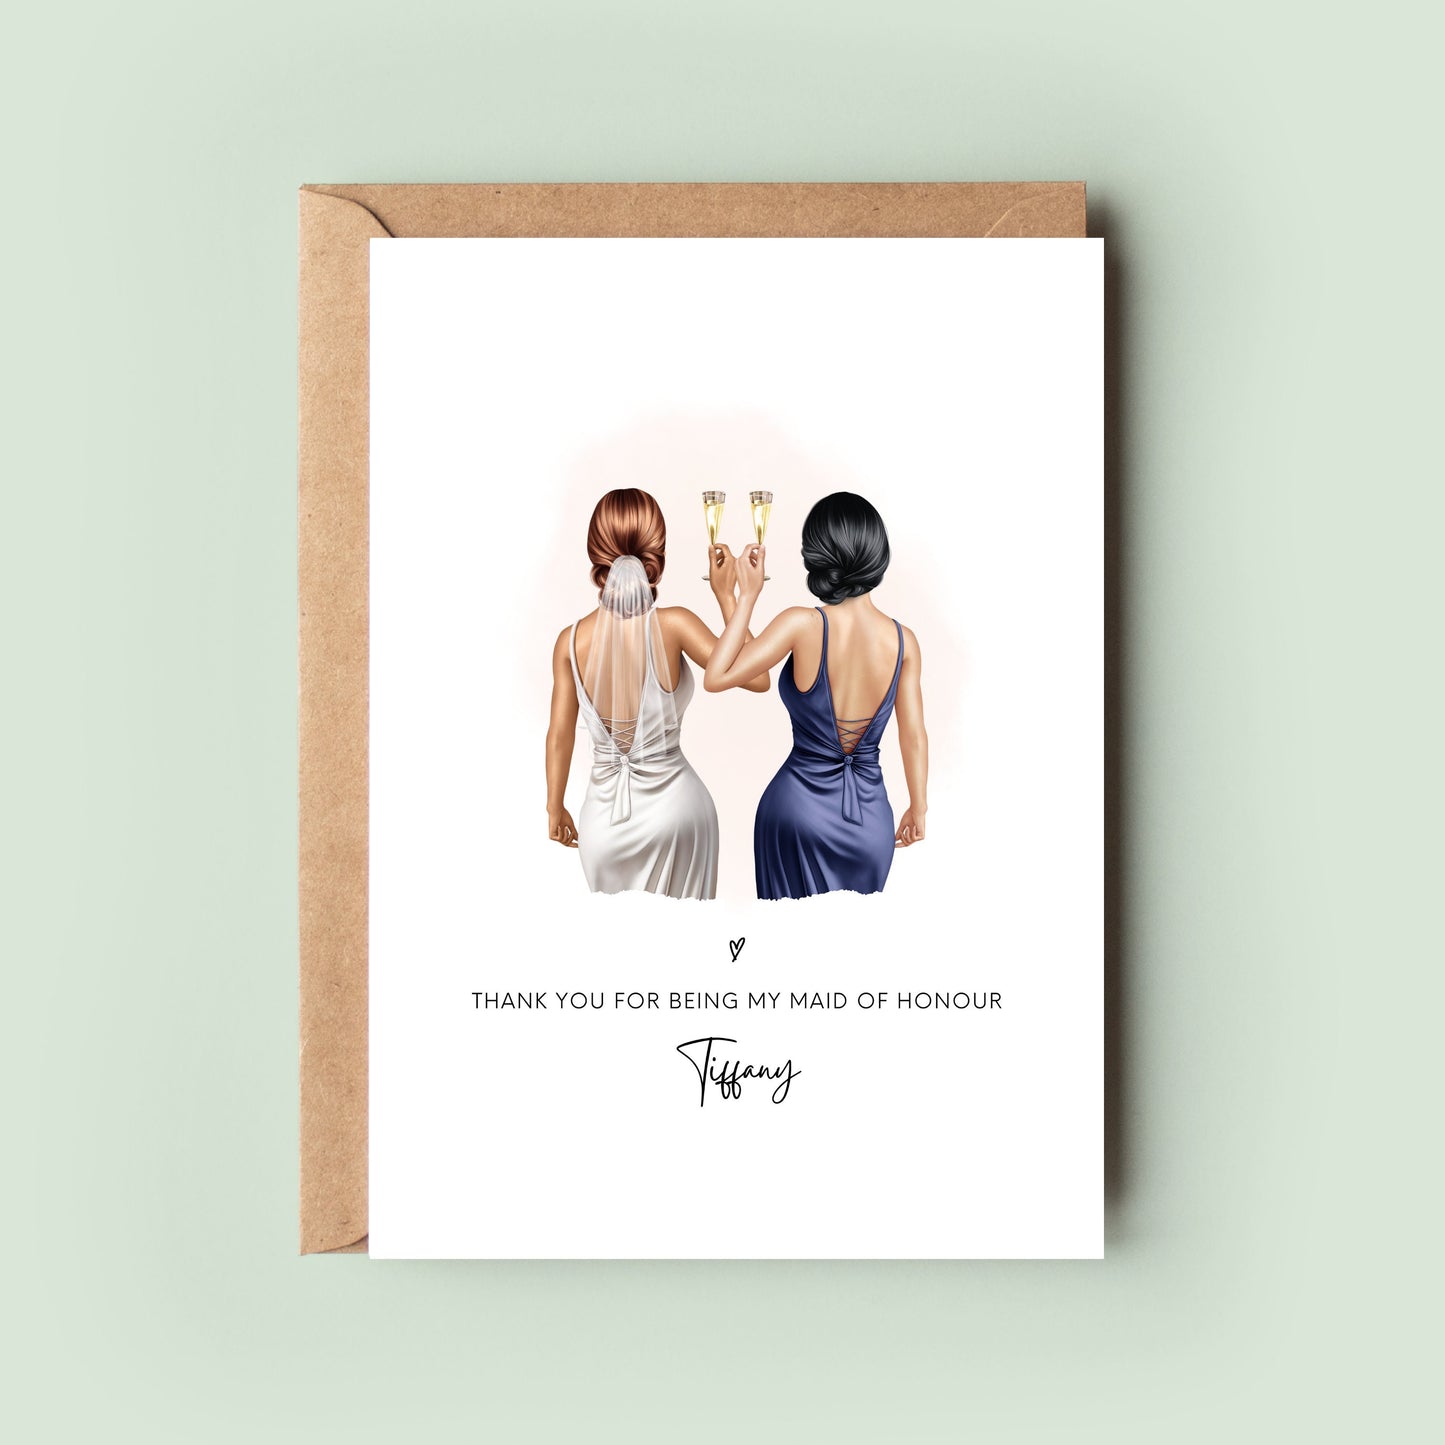 Personalised Maid of Honour Thank You Cards, Custom Maid of Honour Gift, Maid of Honour Thank You Card, Maid of Honour Proposal